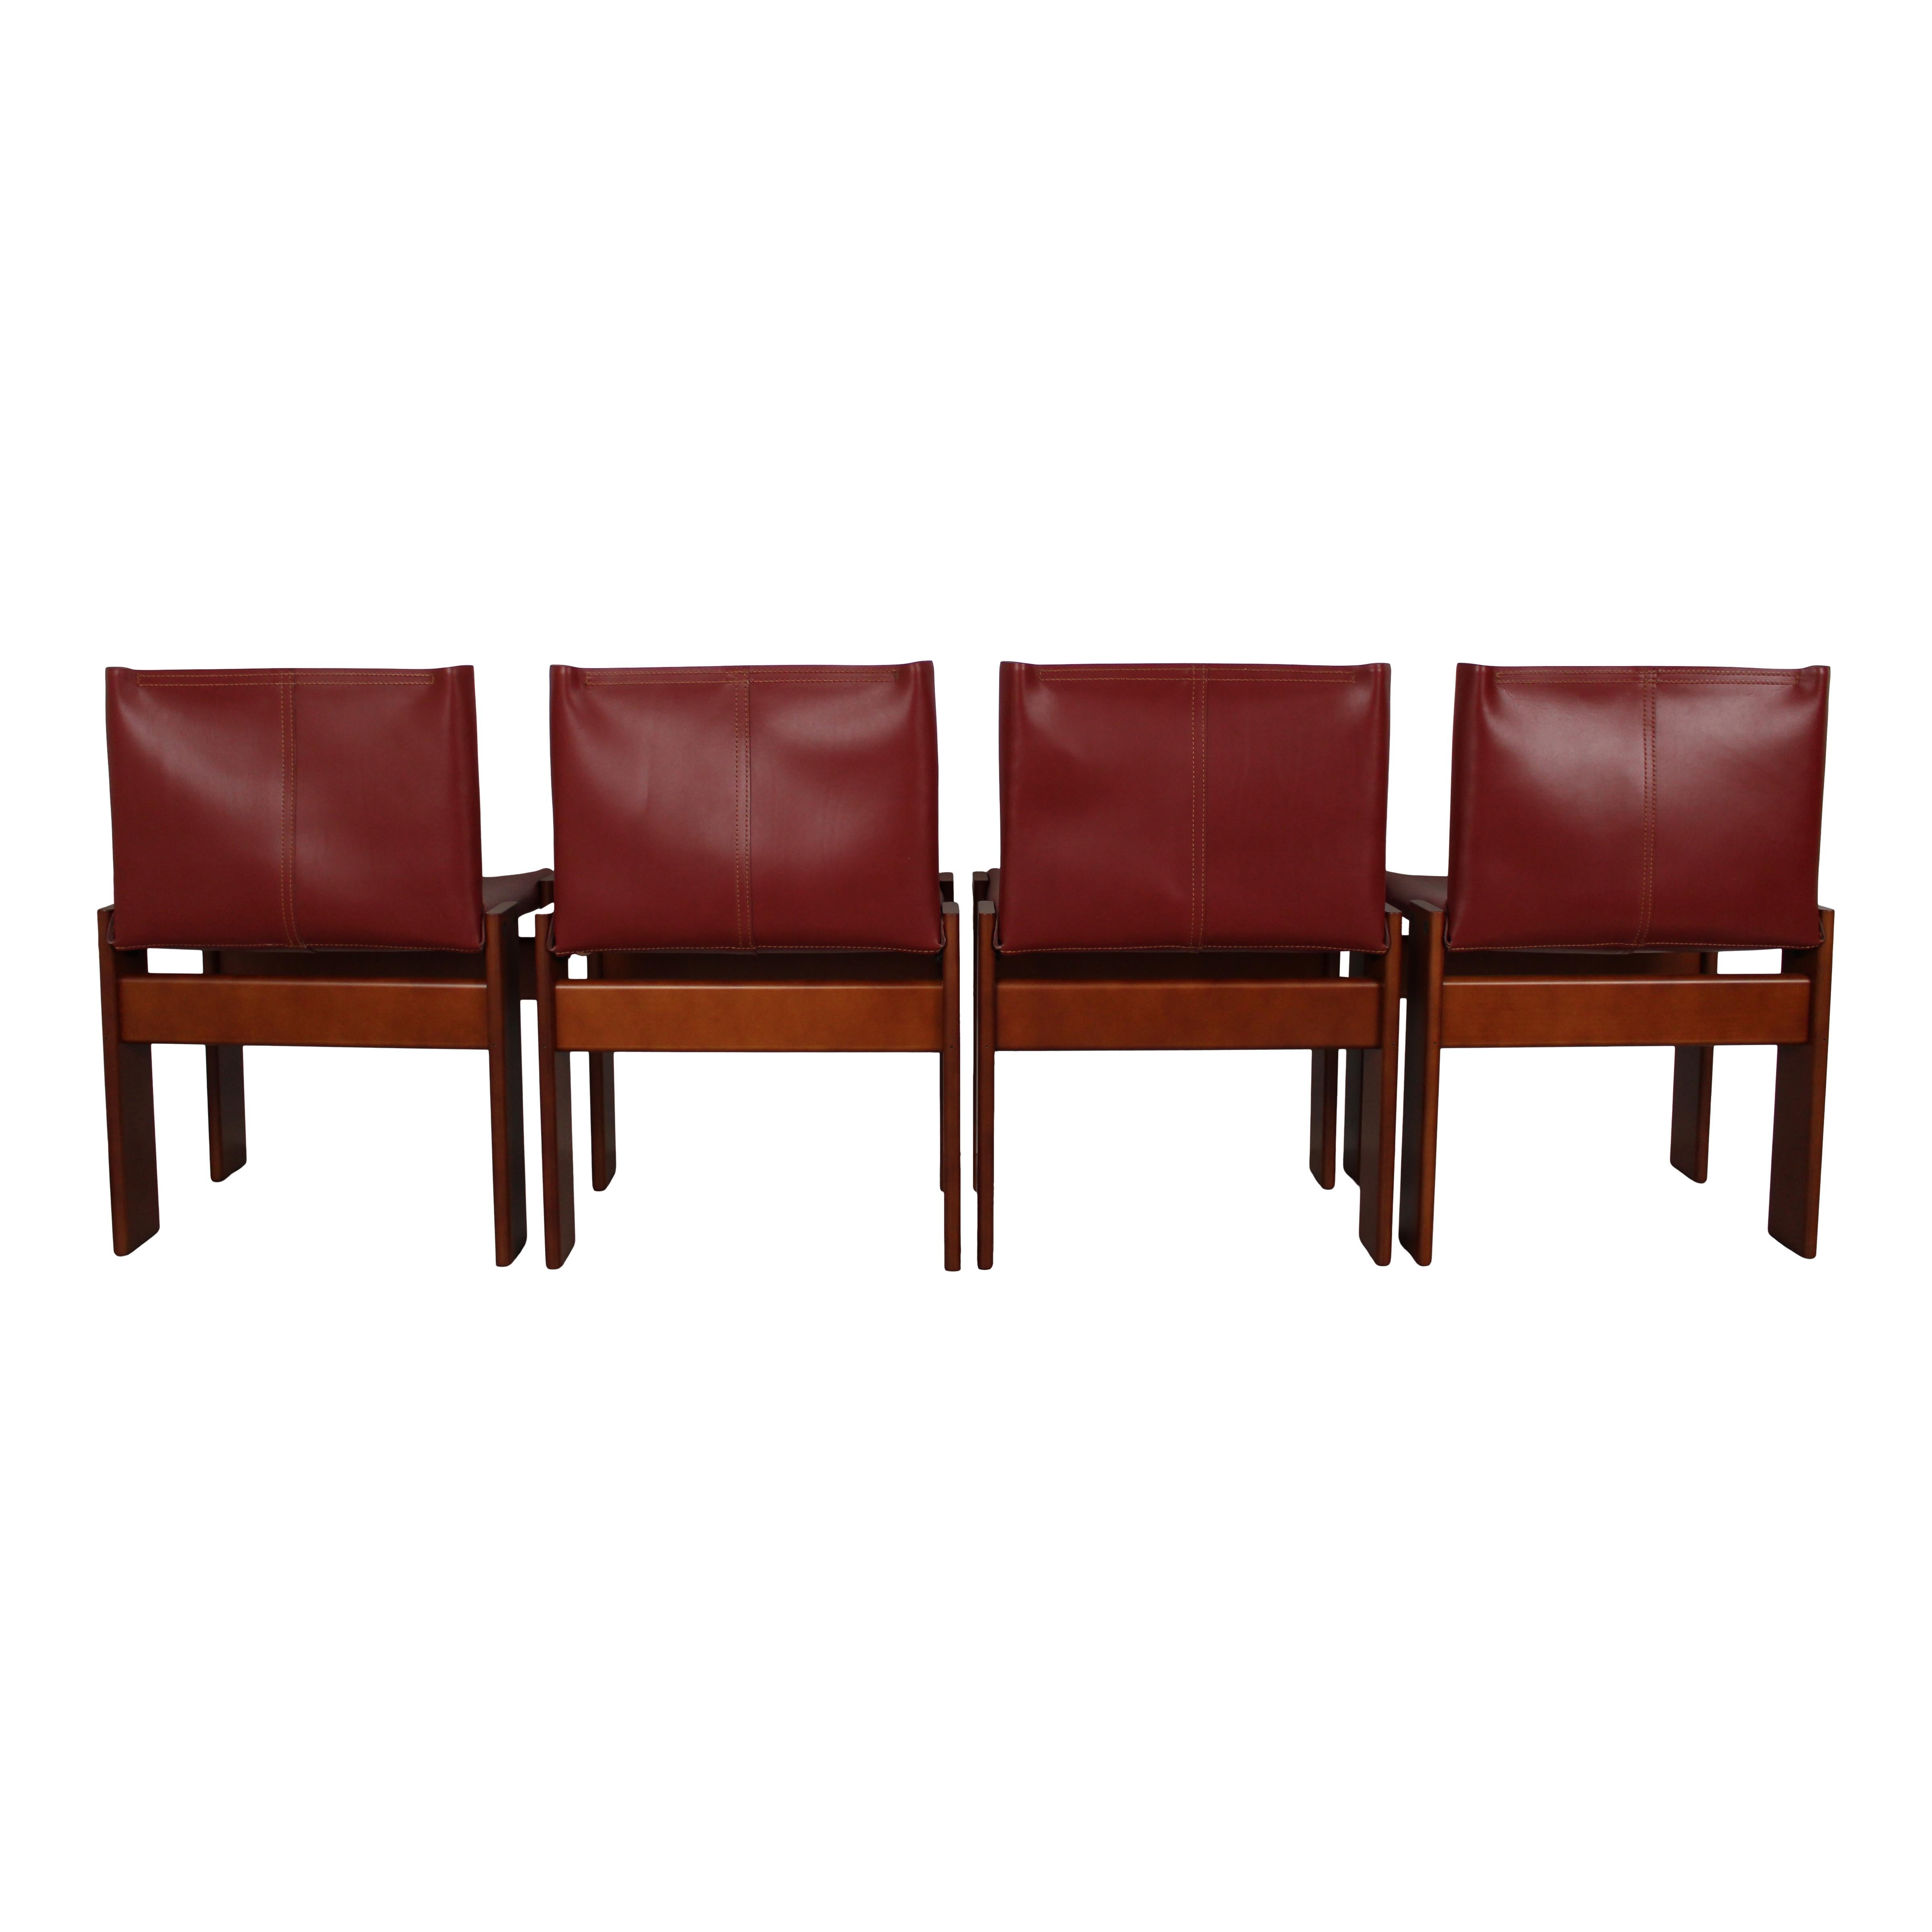 Afra & Tobia Scarpa English Red  Leather Monk Dining Chair for Molteni, Set of 6 For Sale 3